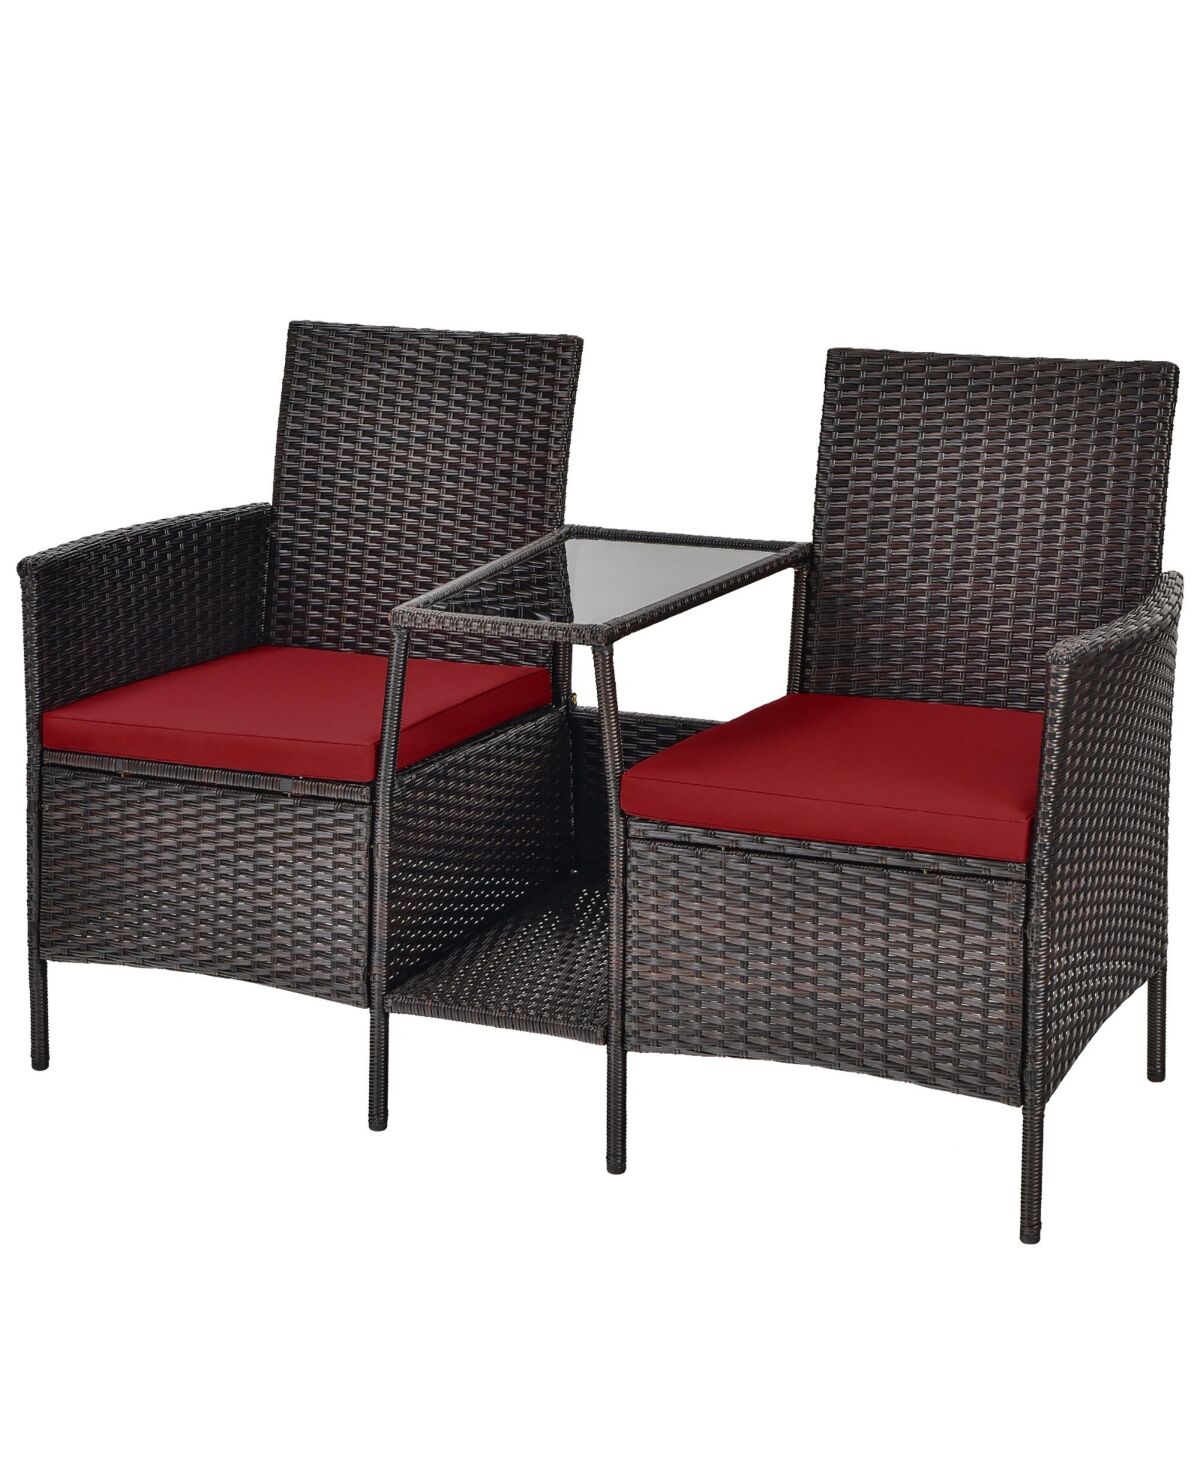 Costway Patio Rattan Wicker Conversation Set Sofa Cushioned Loveseat Glass Table - Red